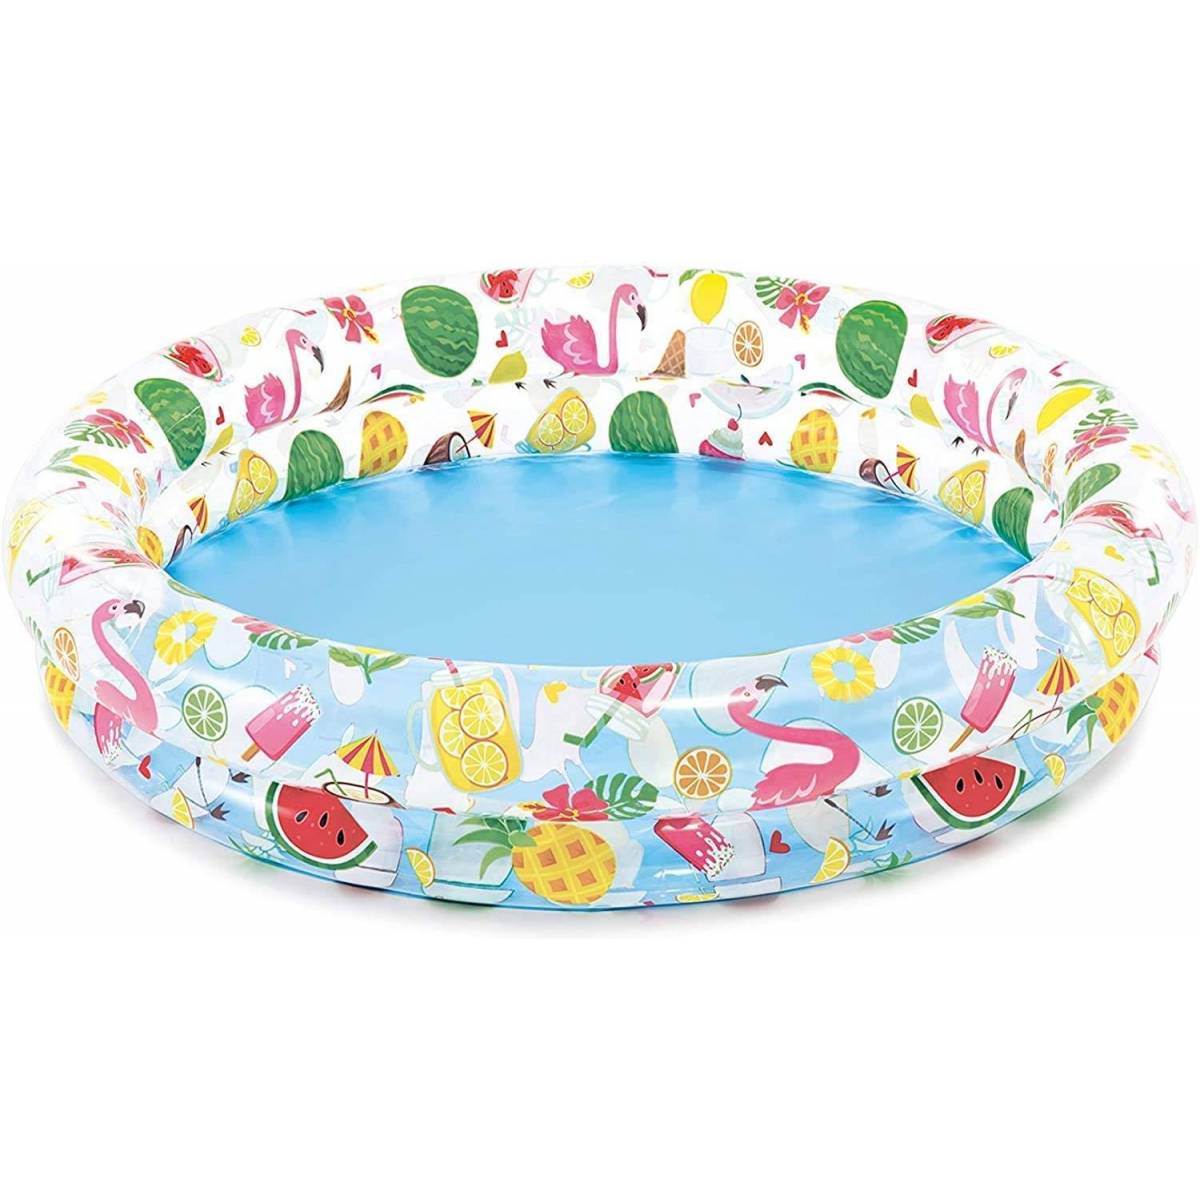 Inflatable Swimming Pool Fruity Intex